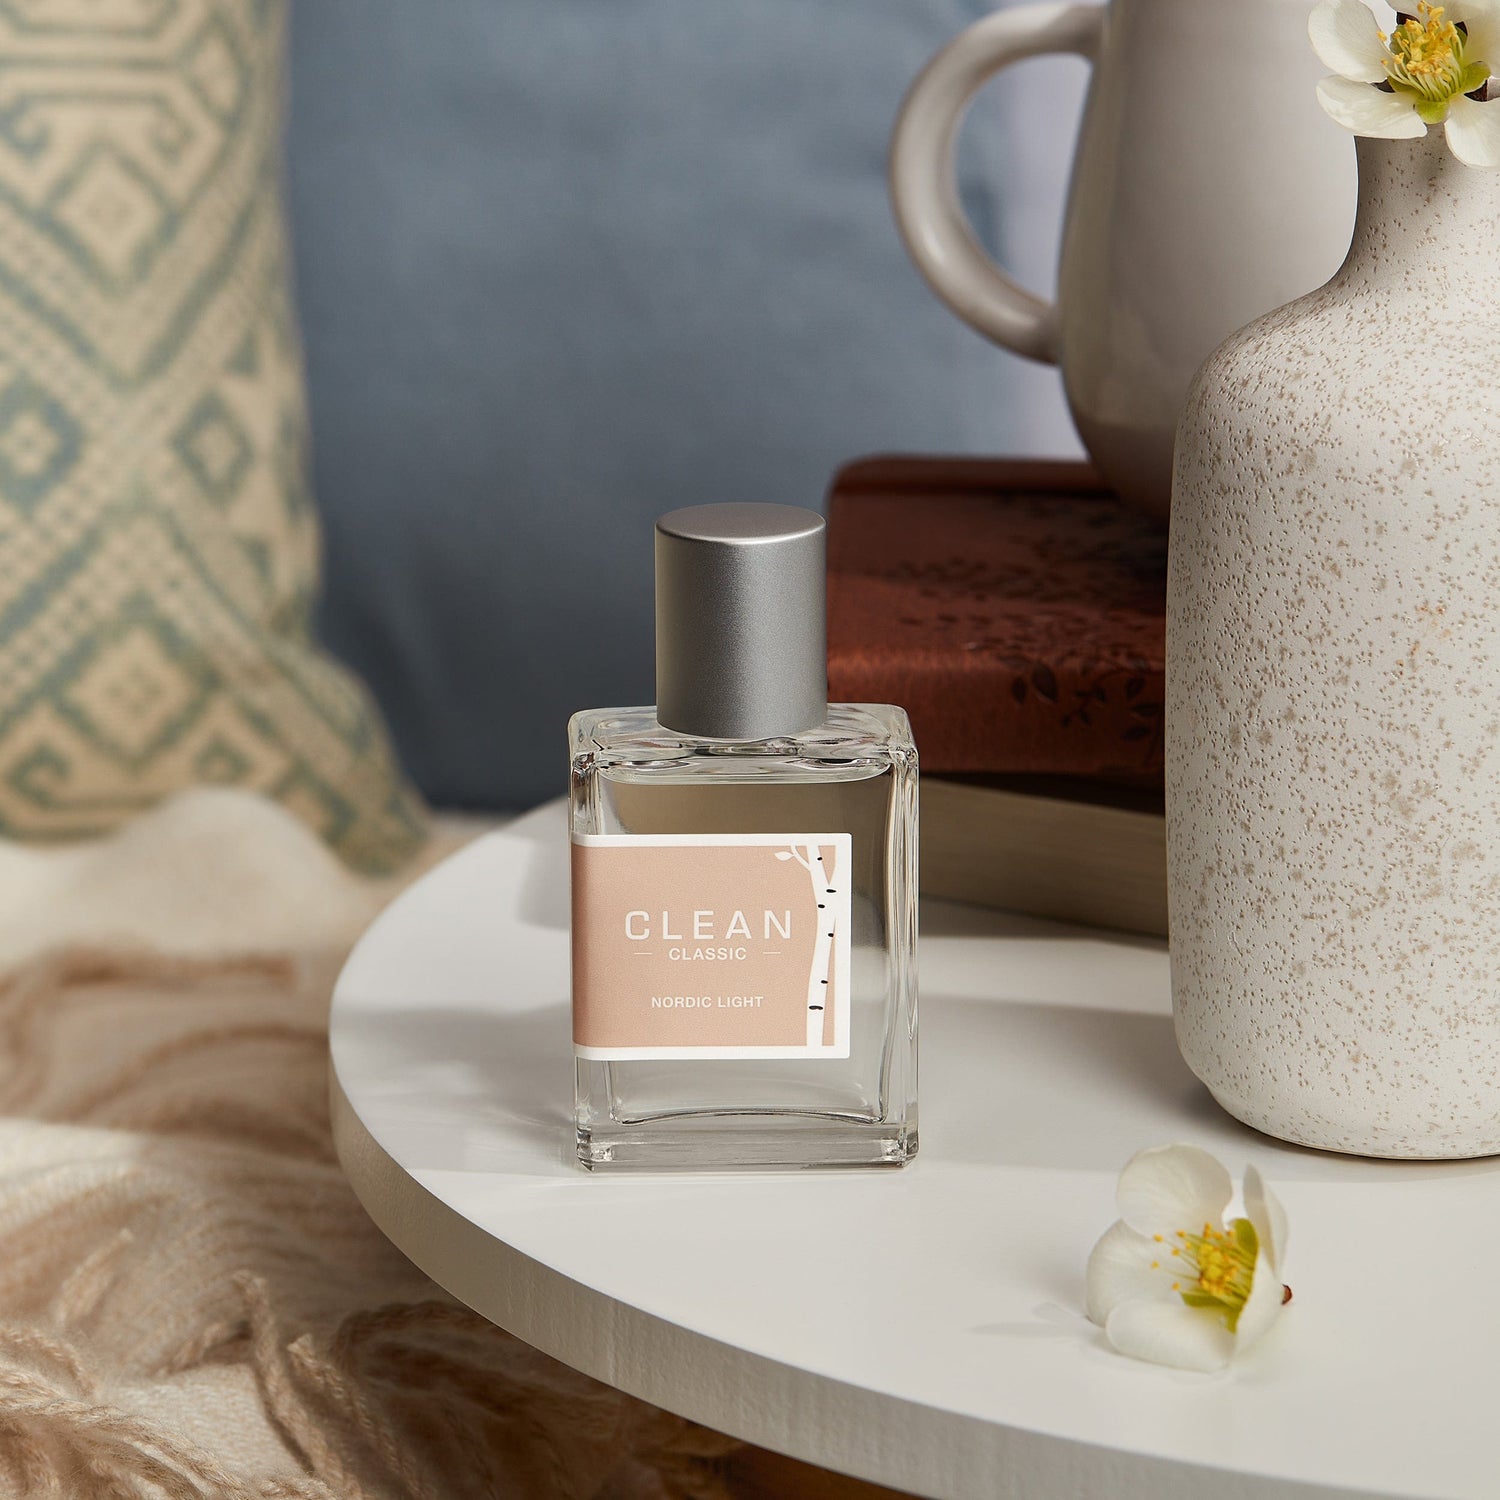 Clean Classic Nordic Light fragrance on night stand